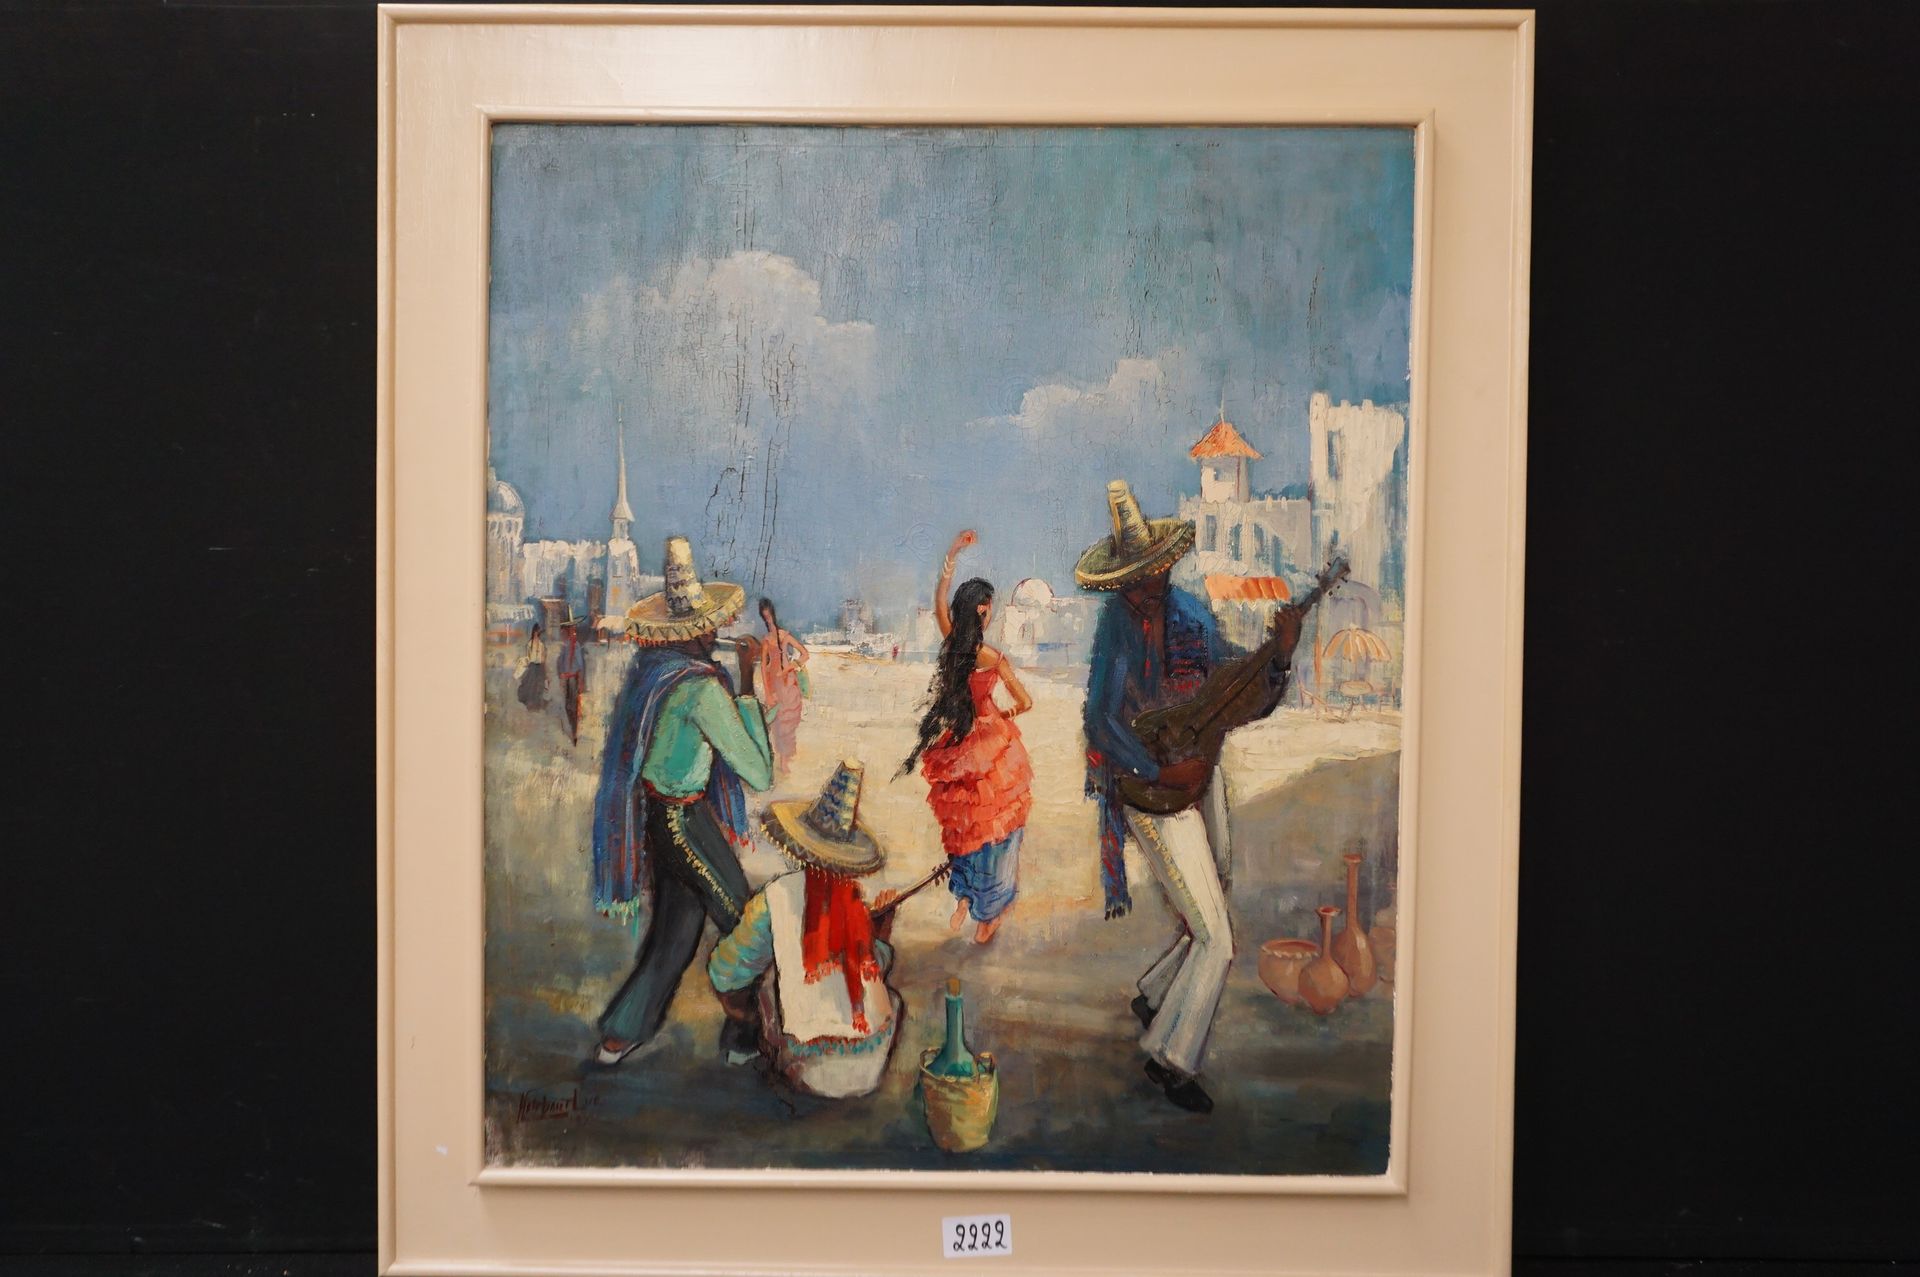 LUC HEIRBAUT (1919 - 2014) "Mexican musicians" - Oil on canvas - Signed - 96 x 8&hellip;